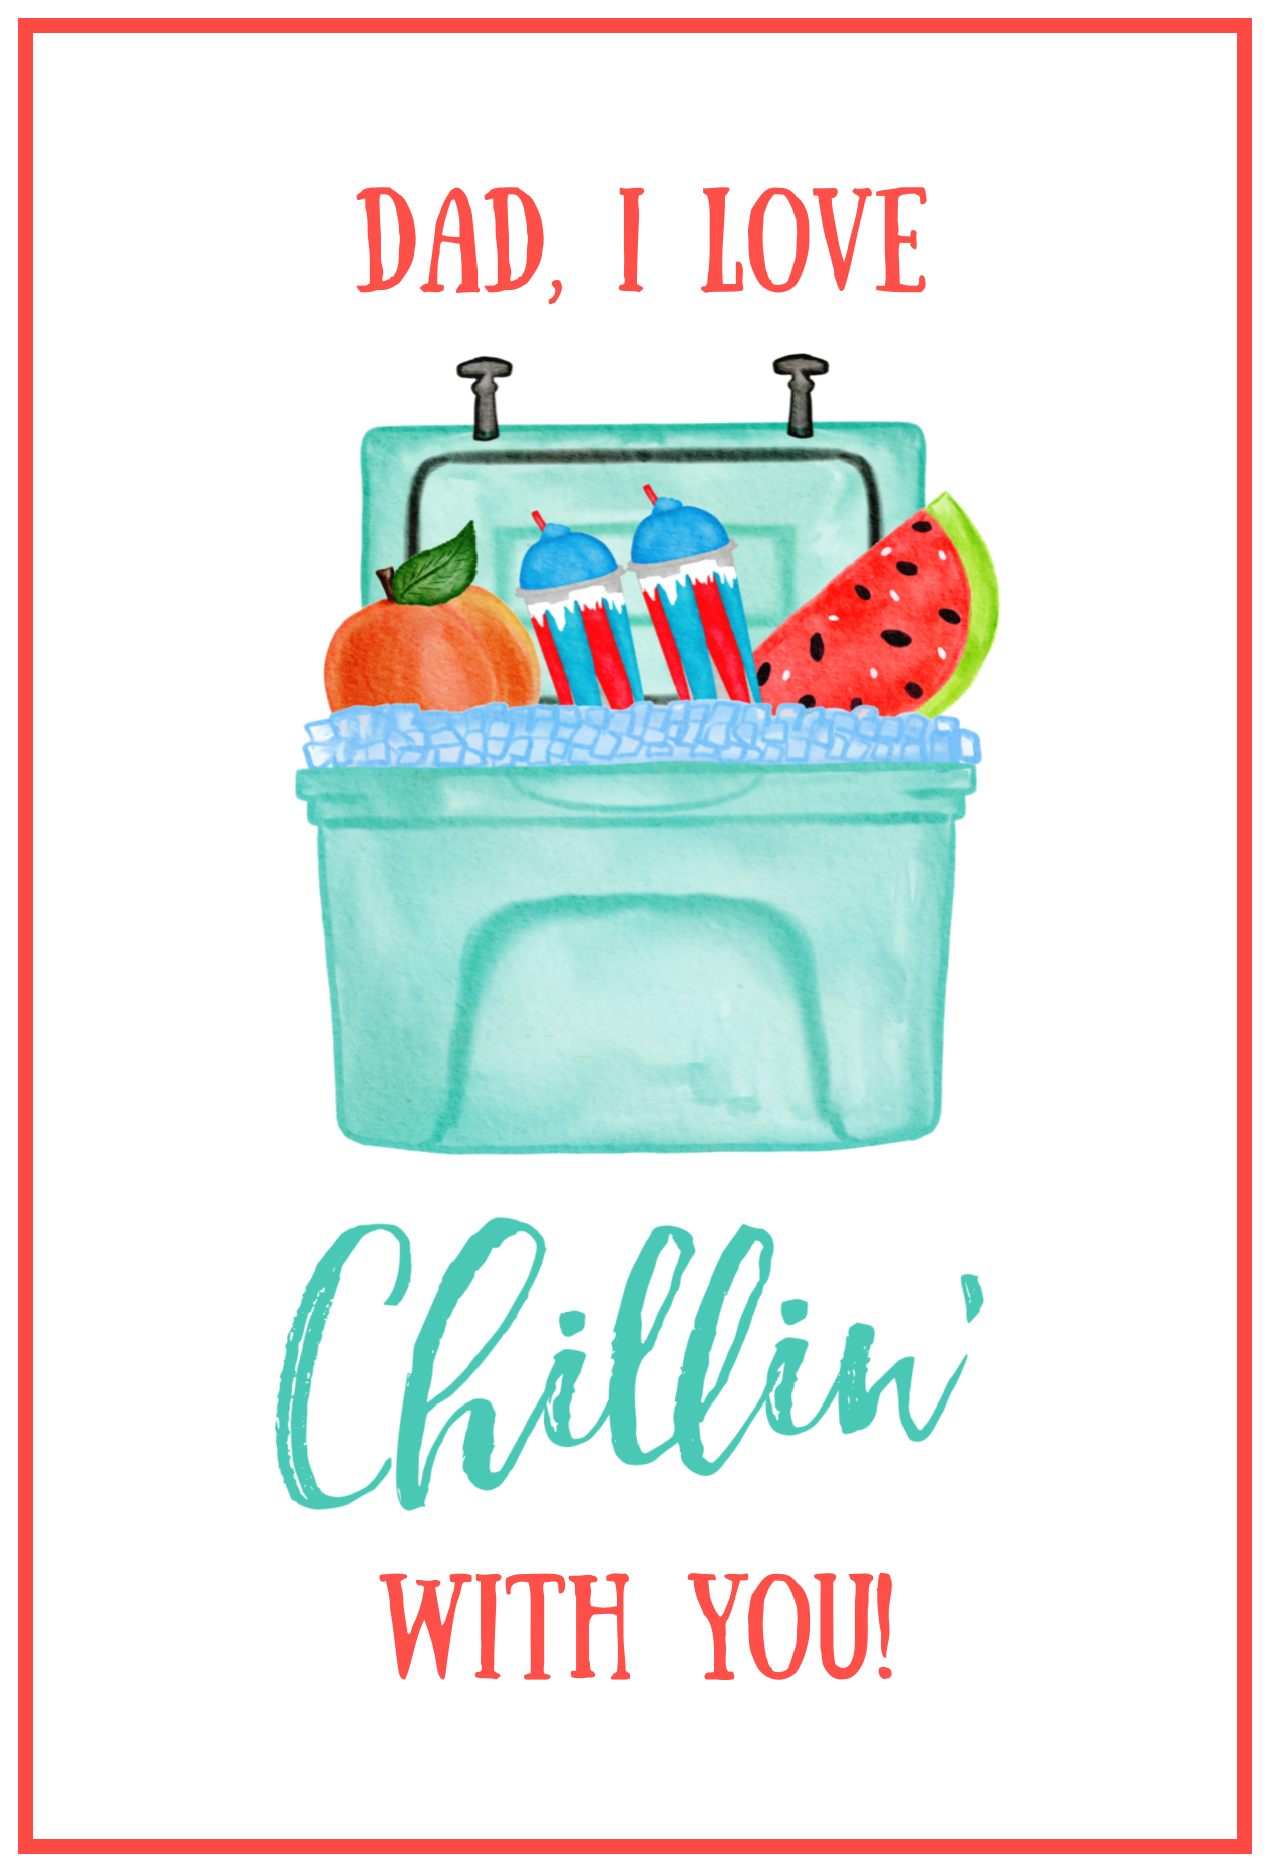 "Dad, I Love Chillin' With You" free printable Father's Day card.